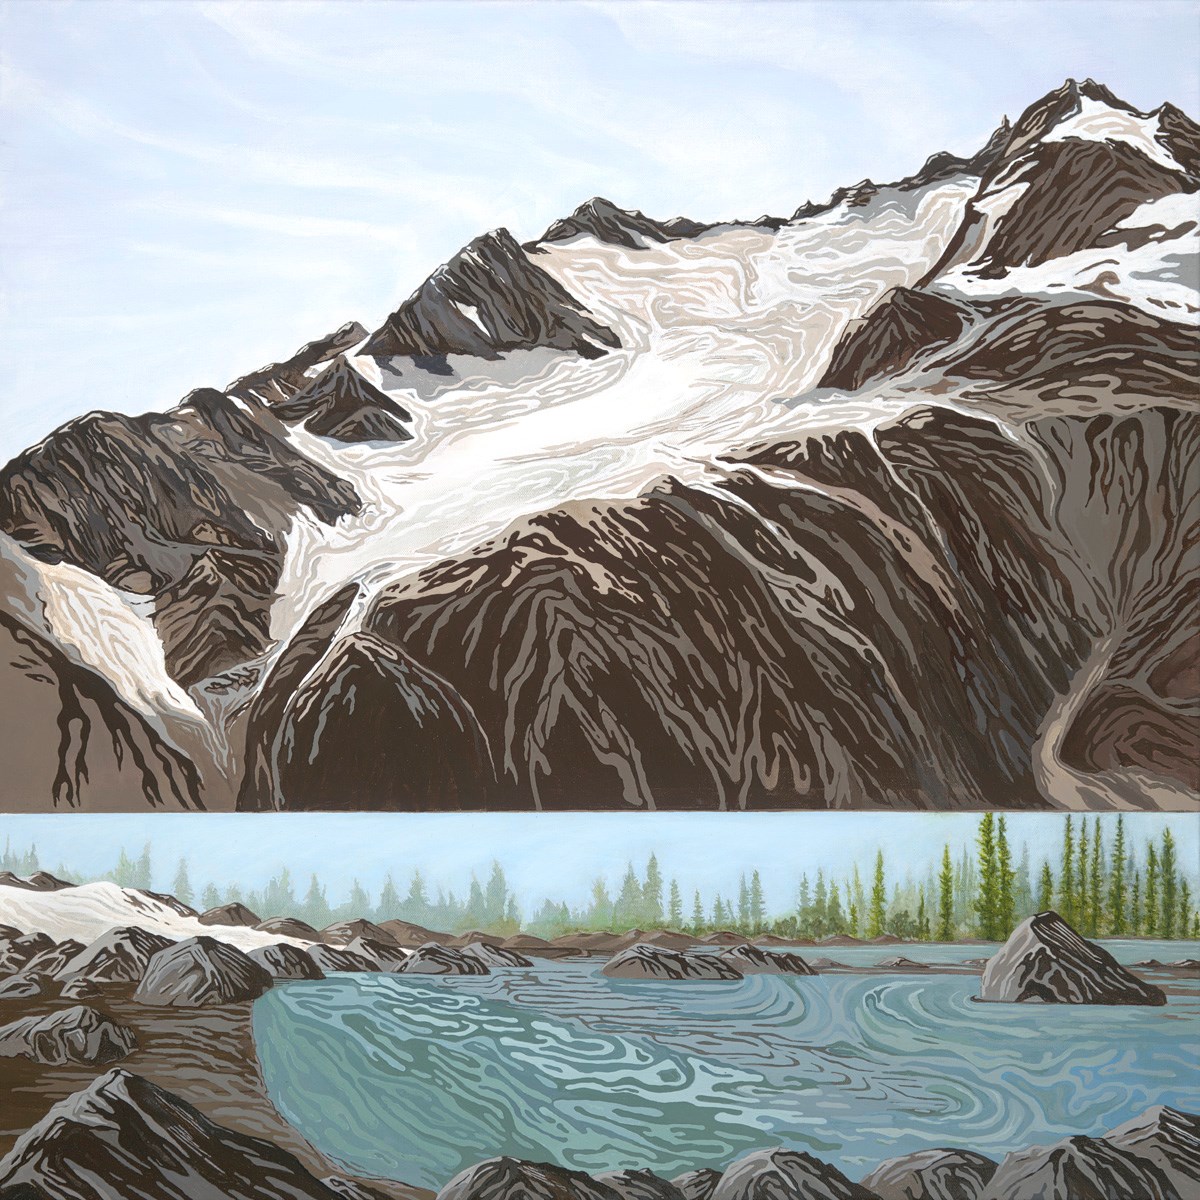 A painting of a mountain glacier with contour-like lines and shading. The bottom third of the painting shows a mountain lake with trees along the shore, and a small snowfield melting into the lake.